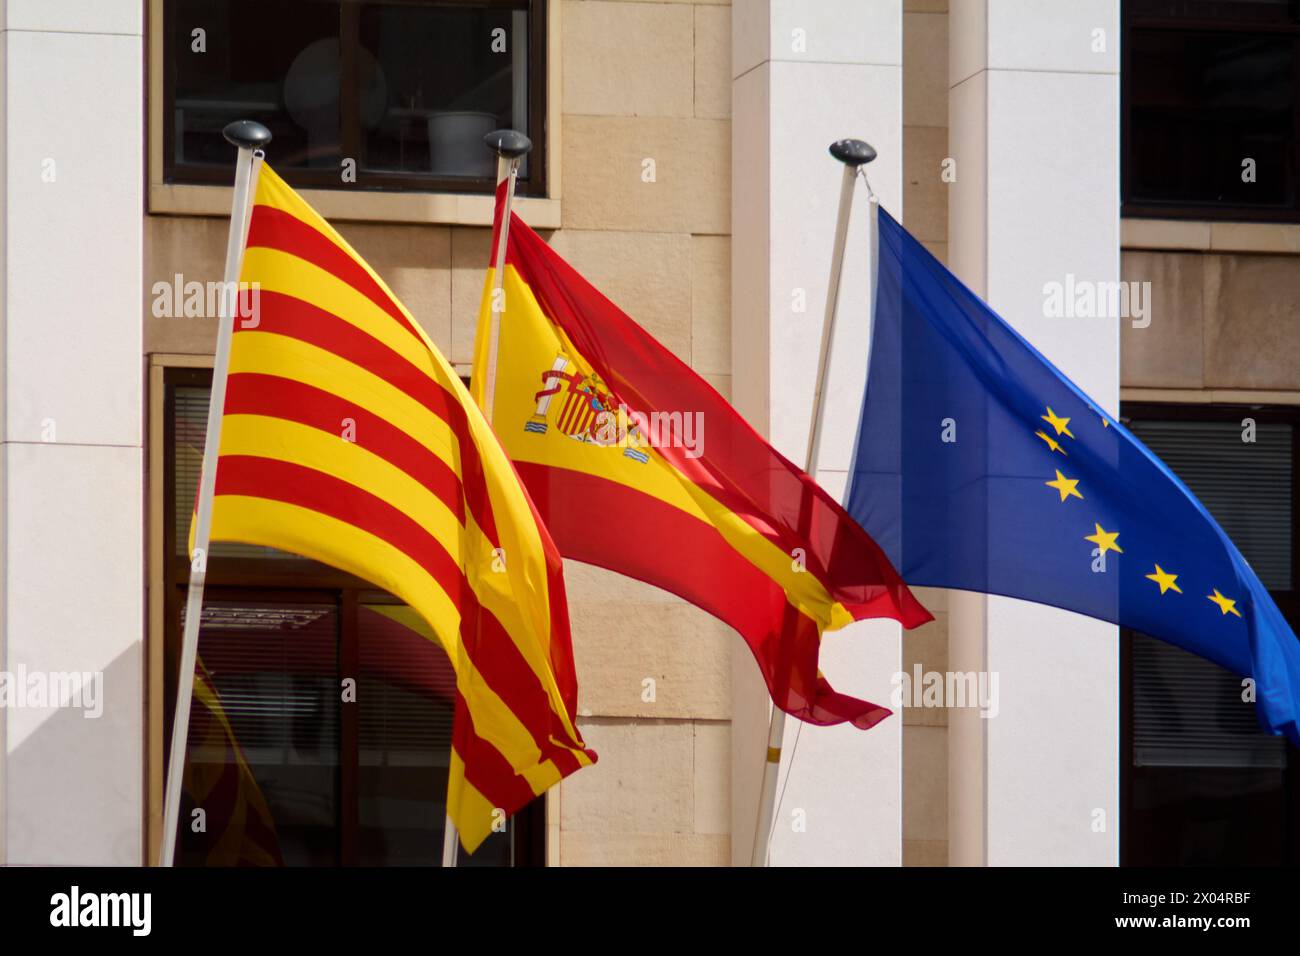 The flags of Spain, Catalonia, and Europe fluttering in the wind, symbolizing unity, diversity, and coexistence in the European community. Stock Photo